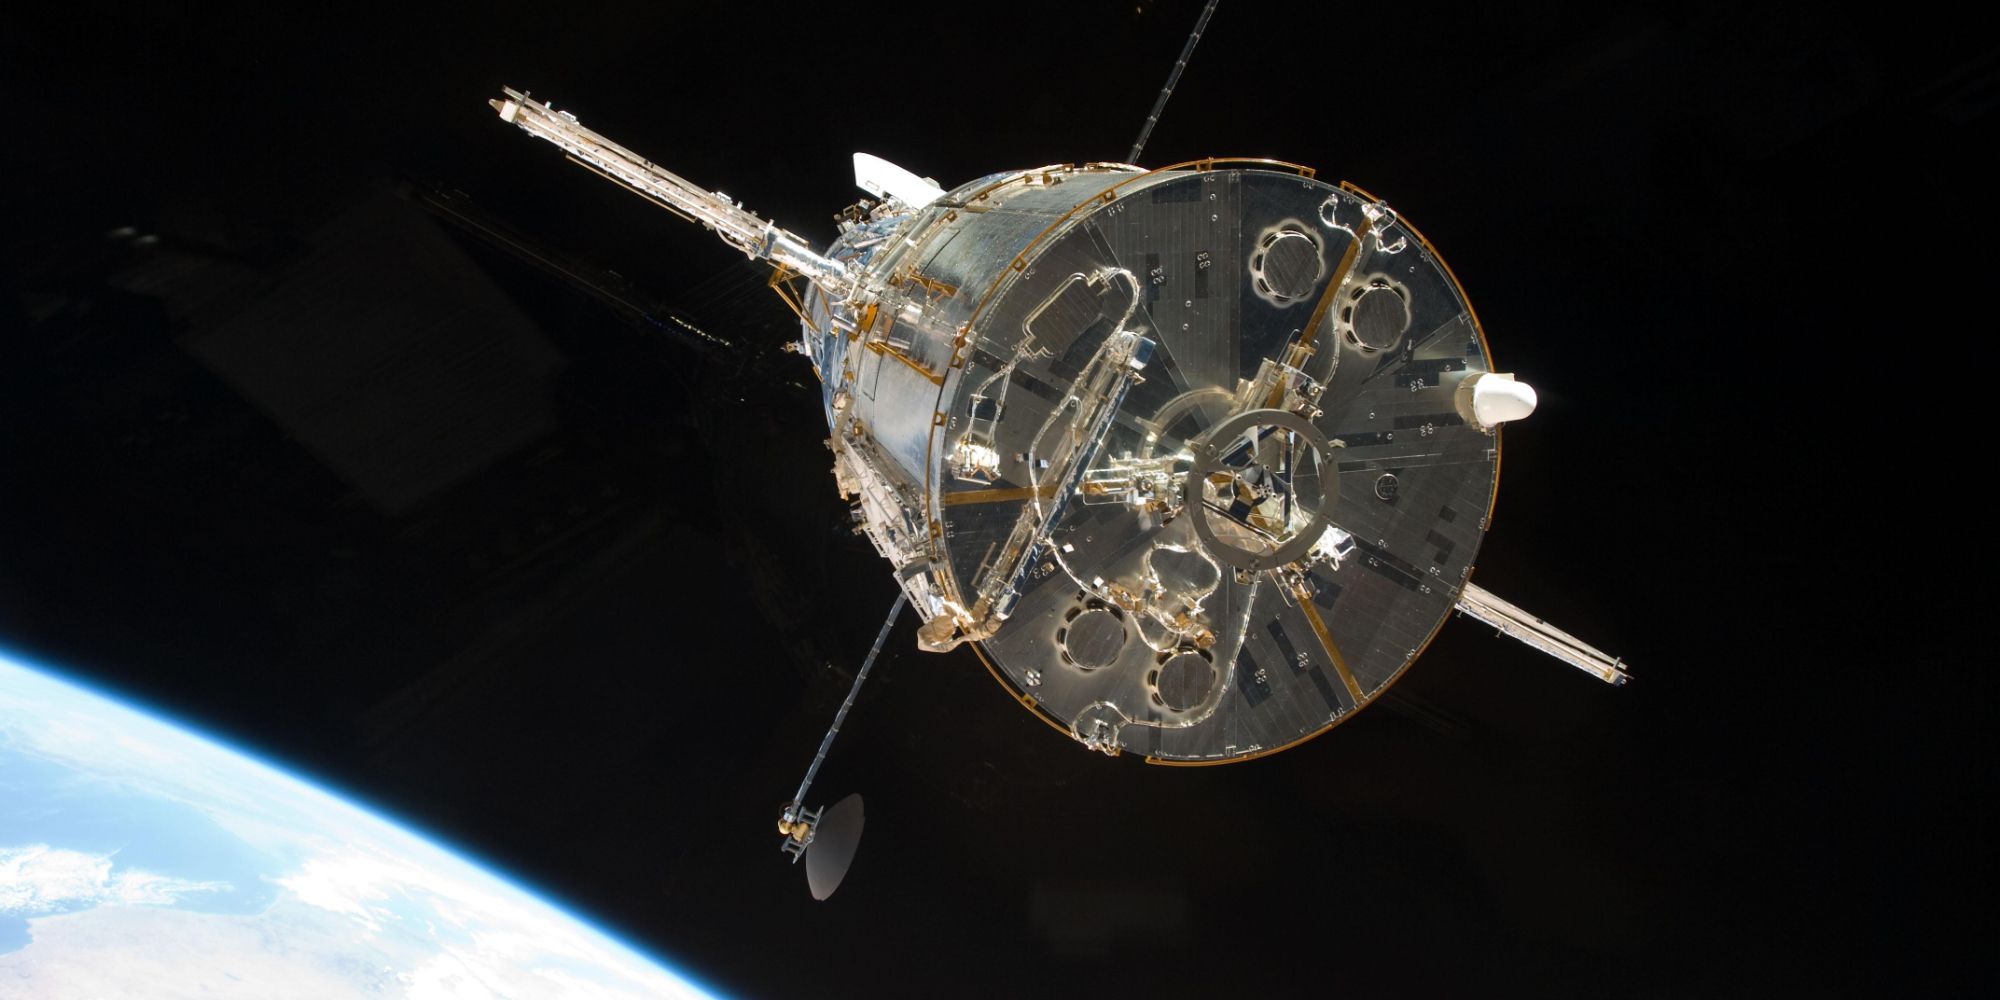 Photo of the Hubble telescope, captured by crew on the Atlantis space shuttle in 2009